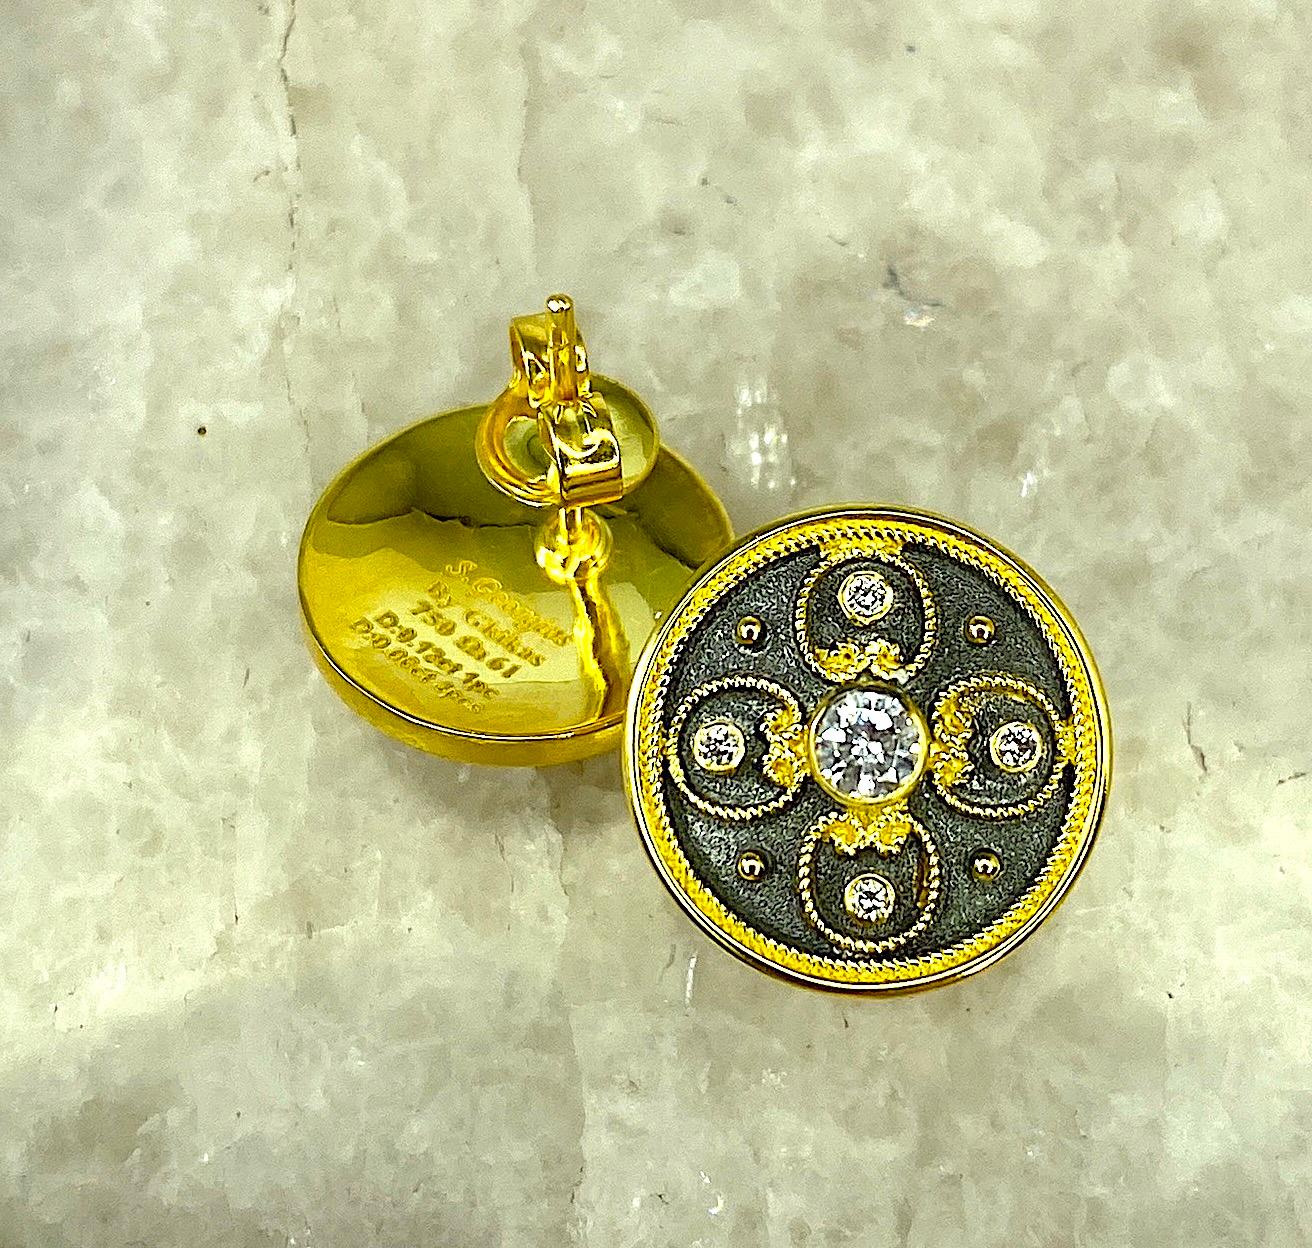 S.Georgios designer earrings are handmade from solid 18 Karat Yellow Gold and all custom-made. The stunning earrings are microscopically decorated with granulation work - beads, and wires shaped like letter Omega of Greek alphabet symbolizing